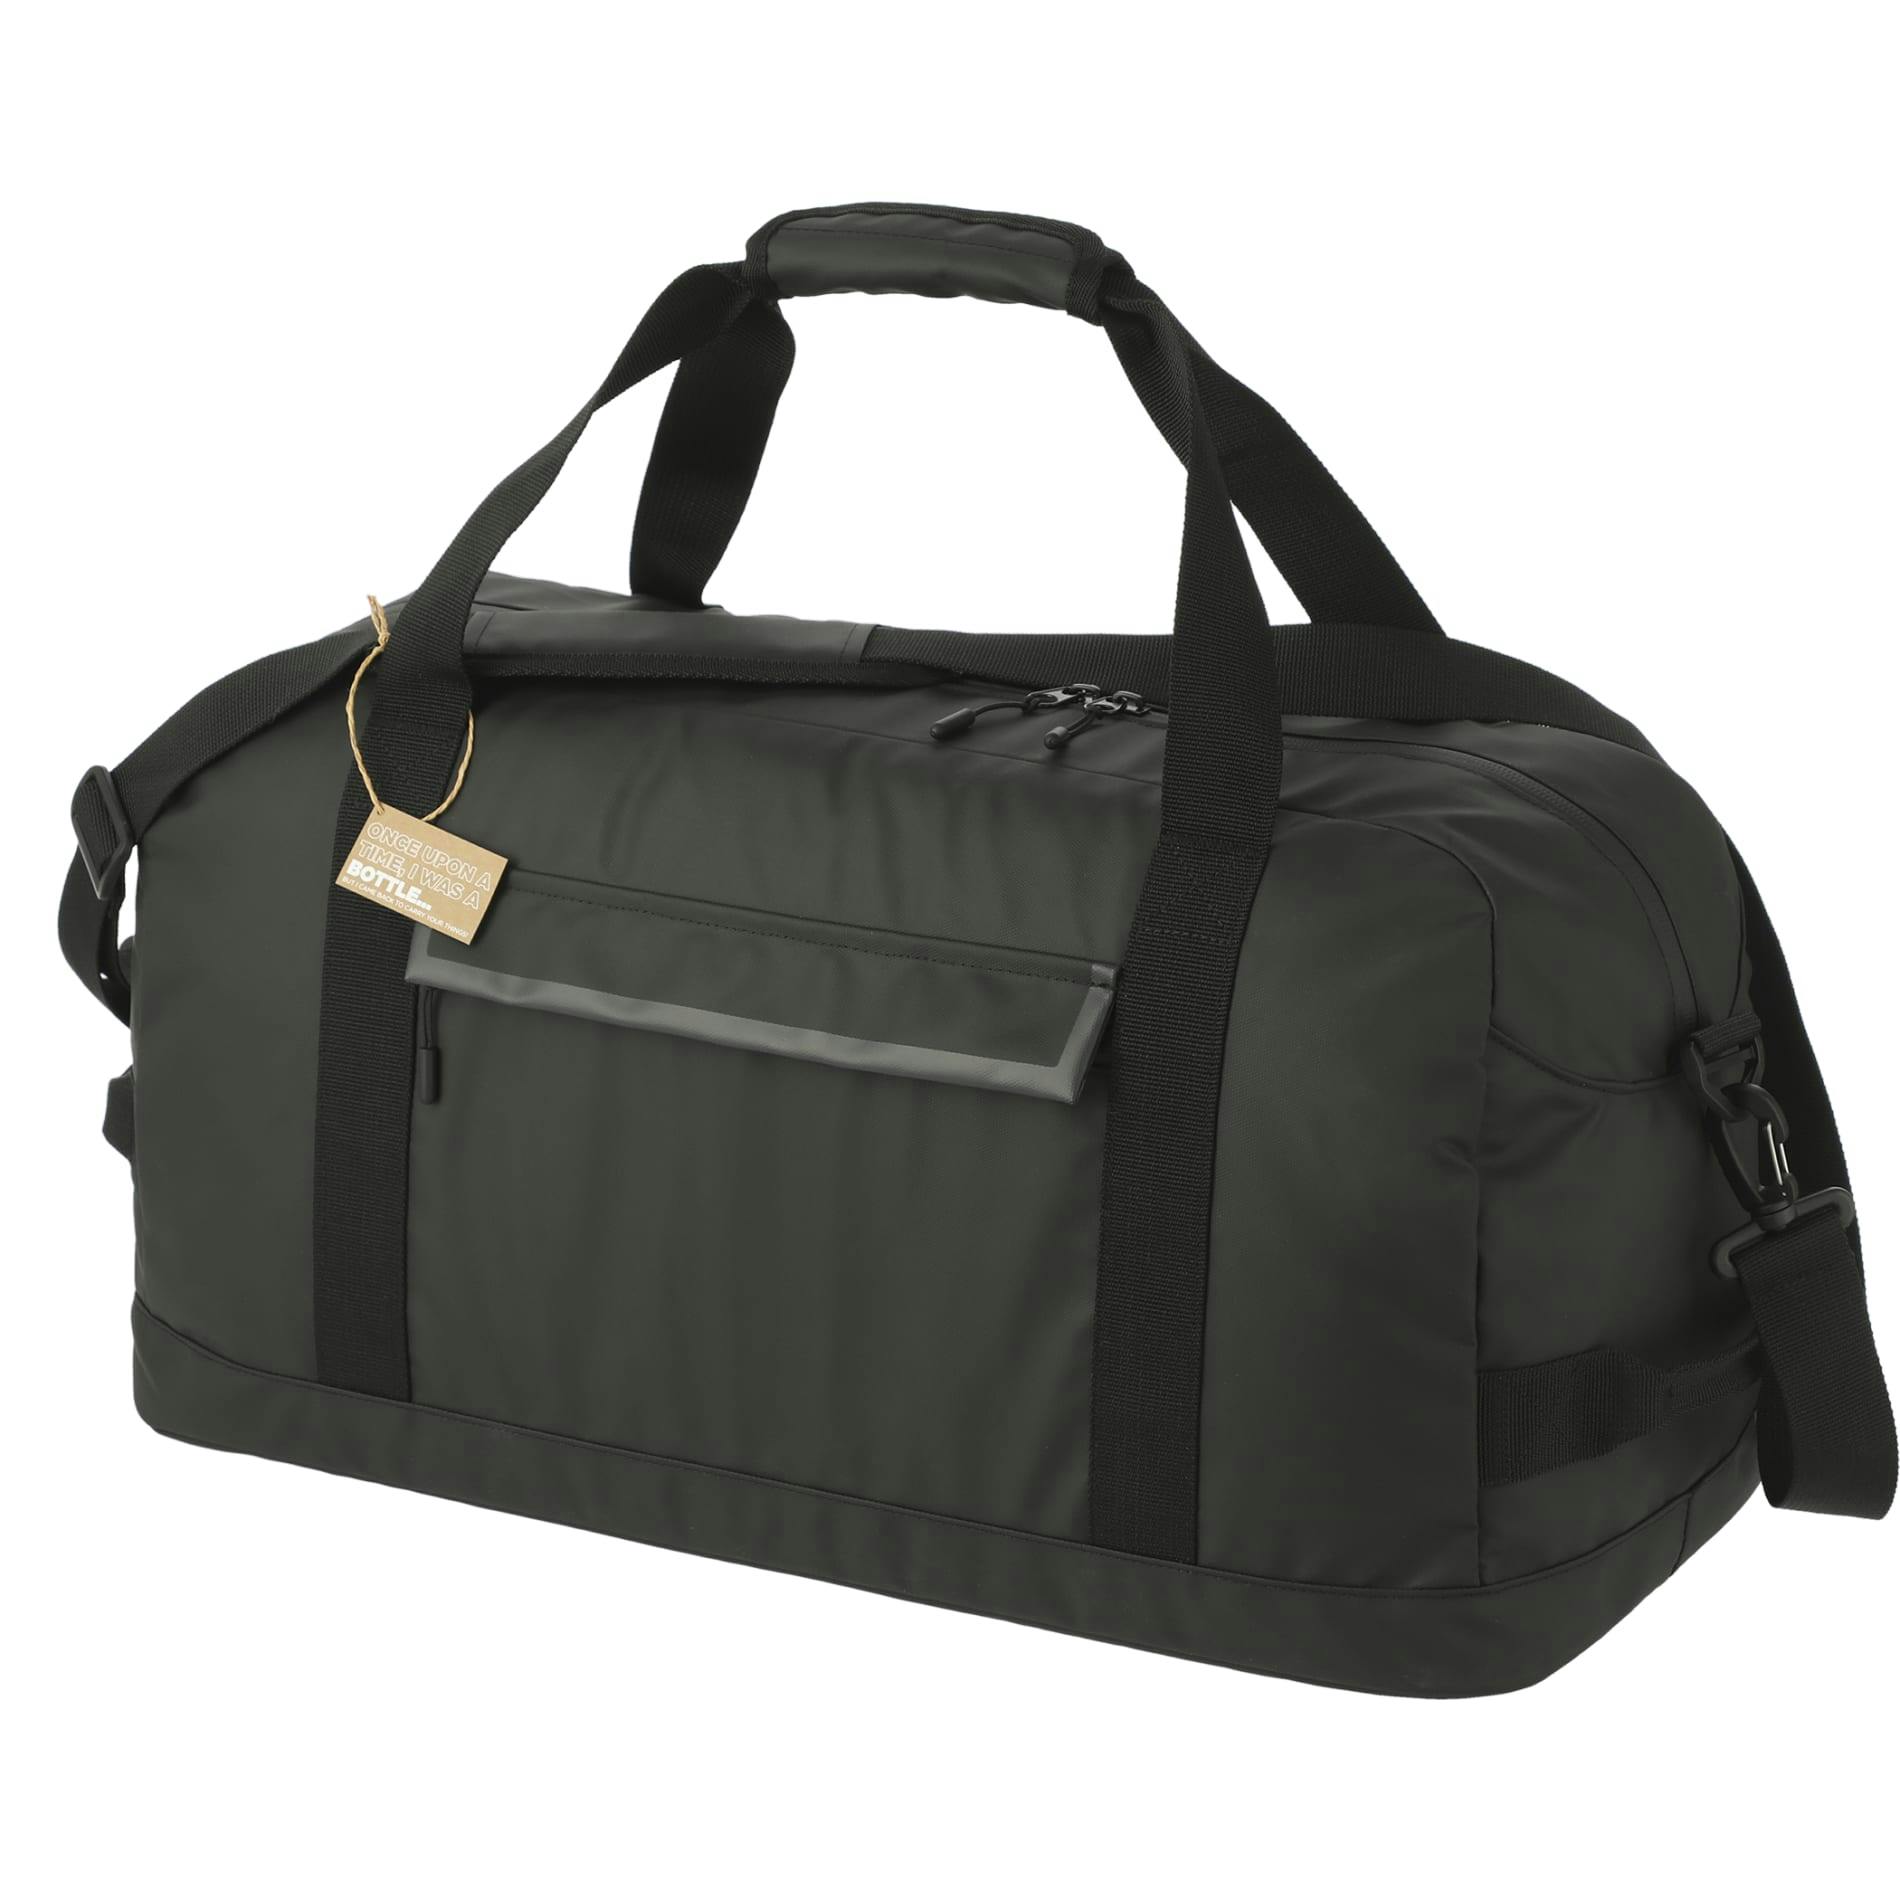 NBN All-Weather Recycled Duffel - additional Image 2